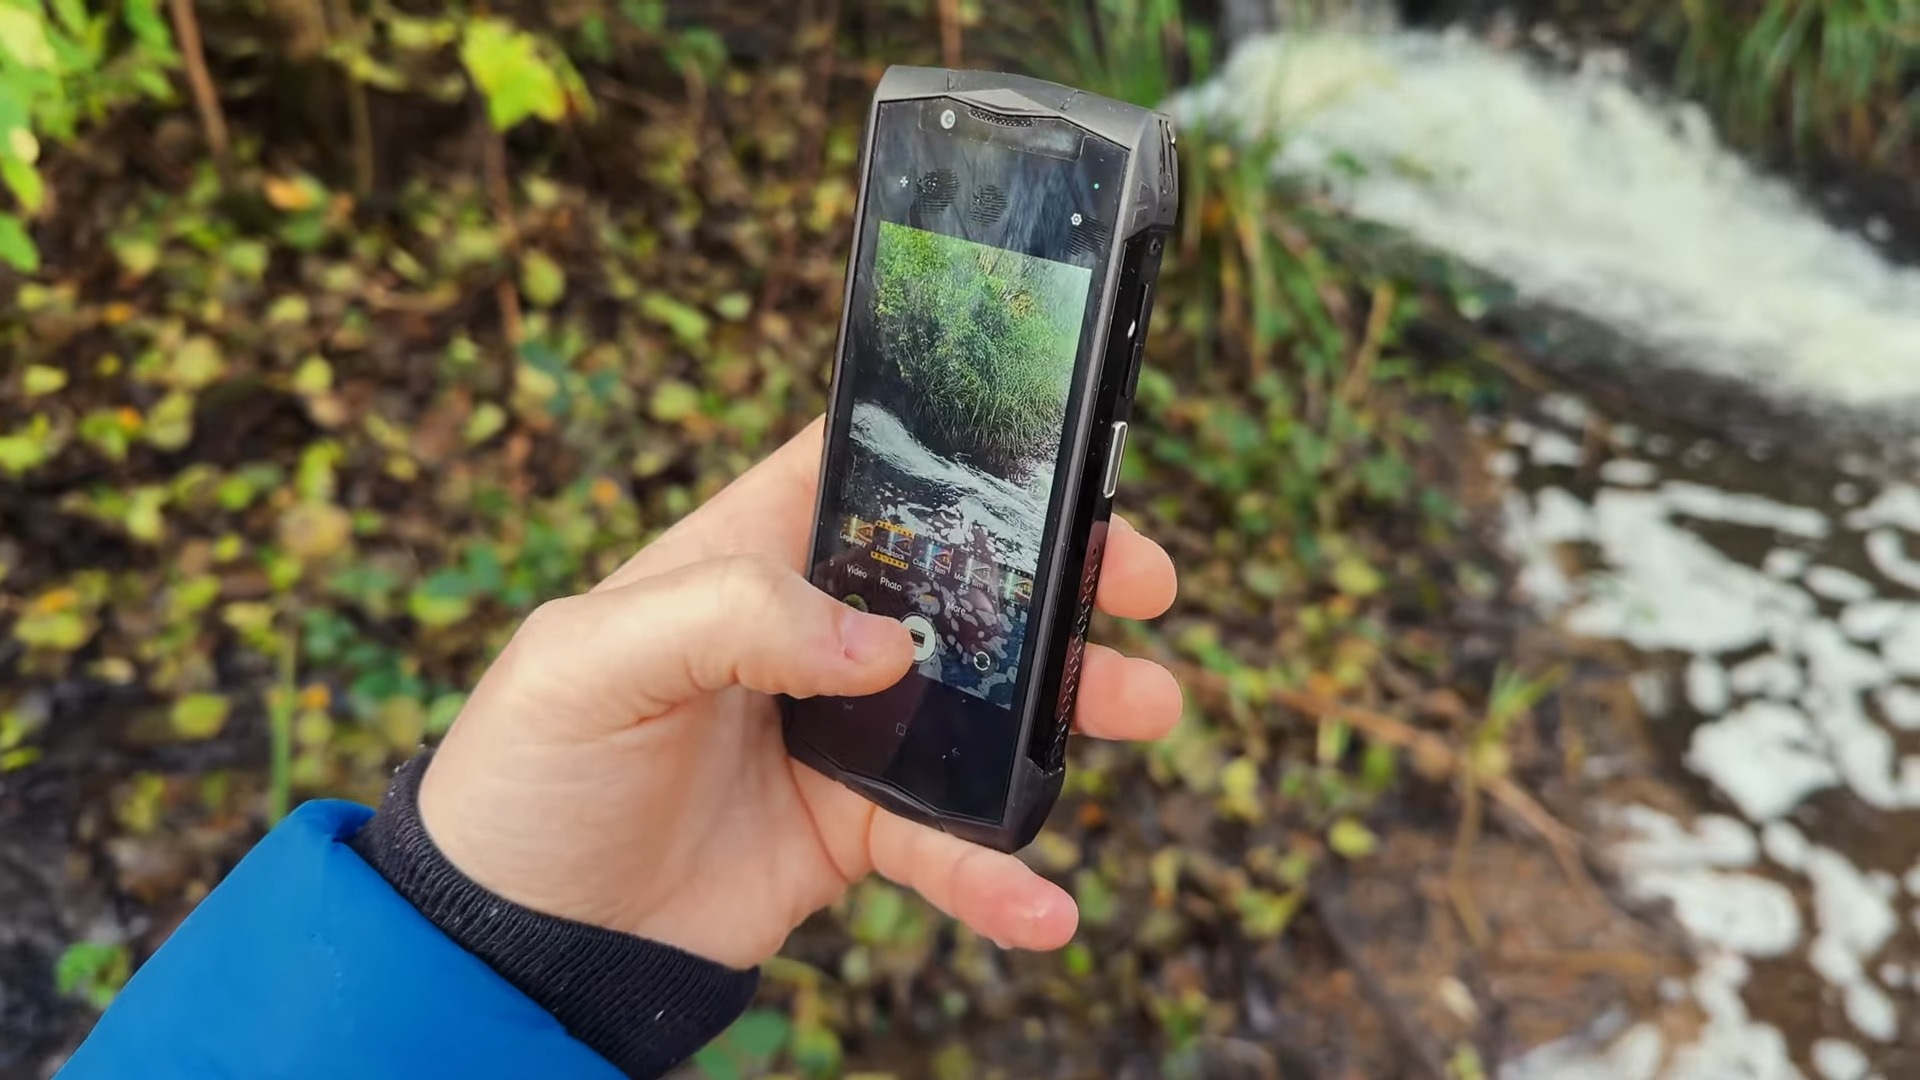 DOOGEE Smini Review - A Tiny Rugged Smartphone with Mighty Power And Rear Display!